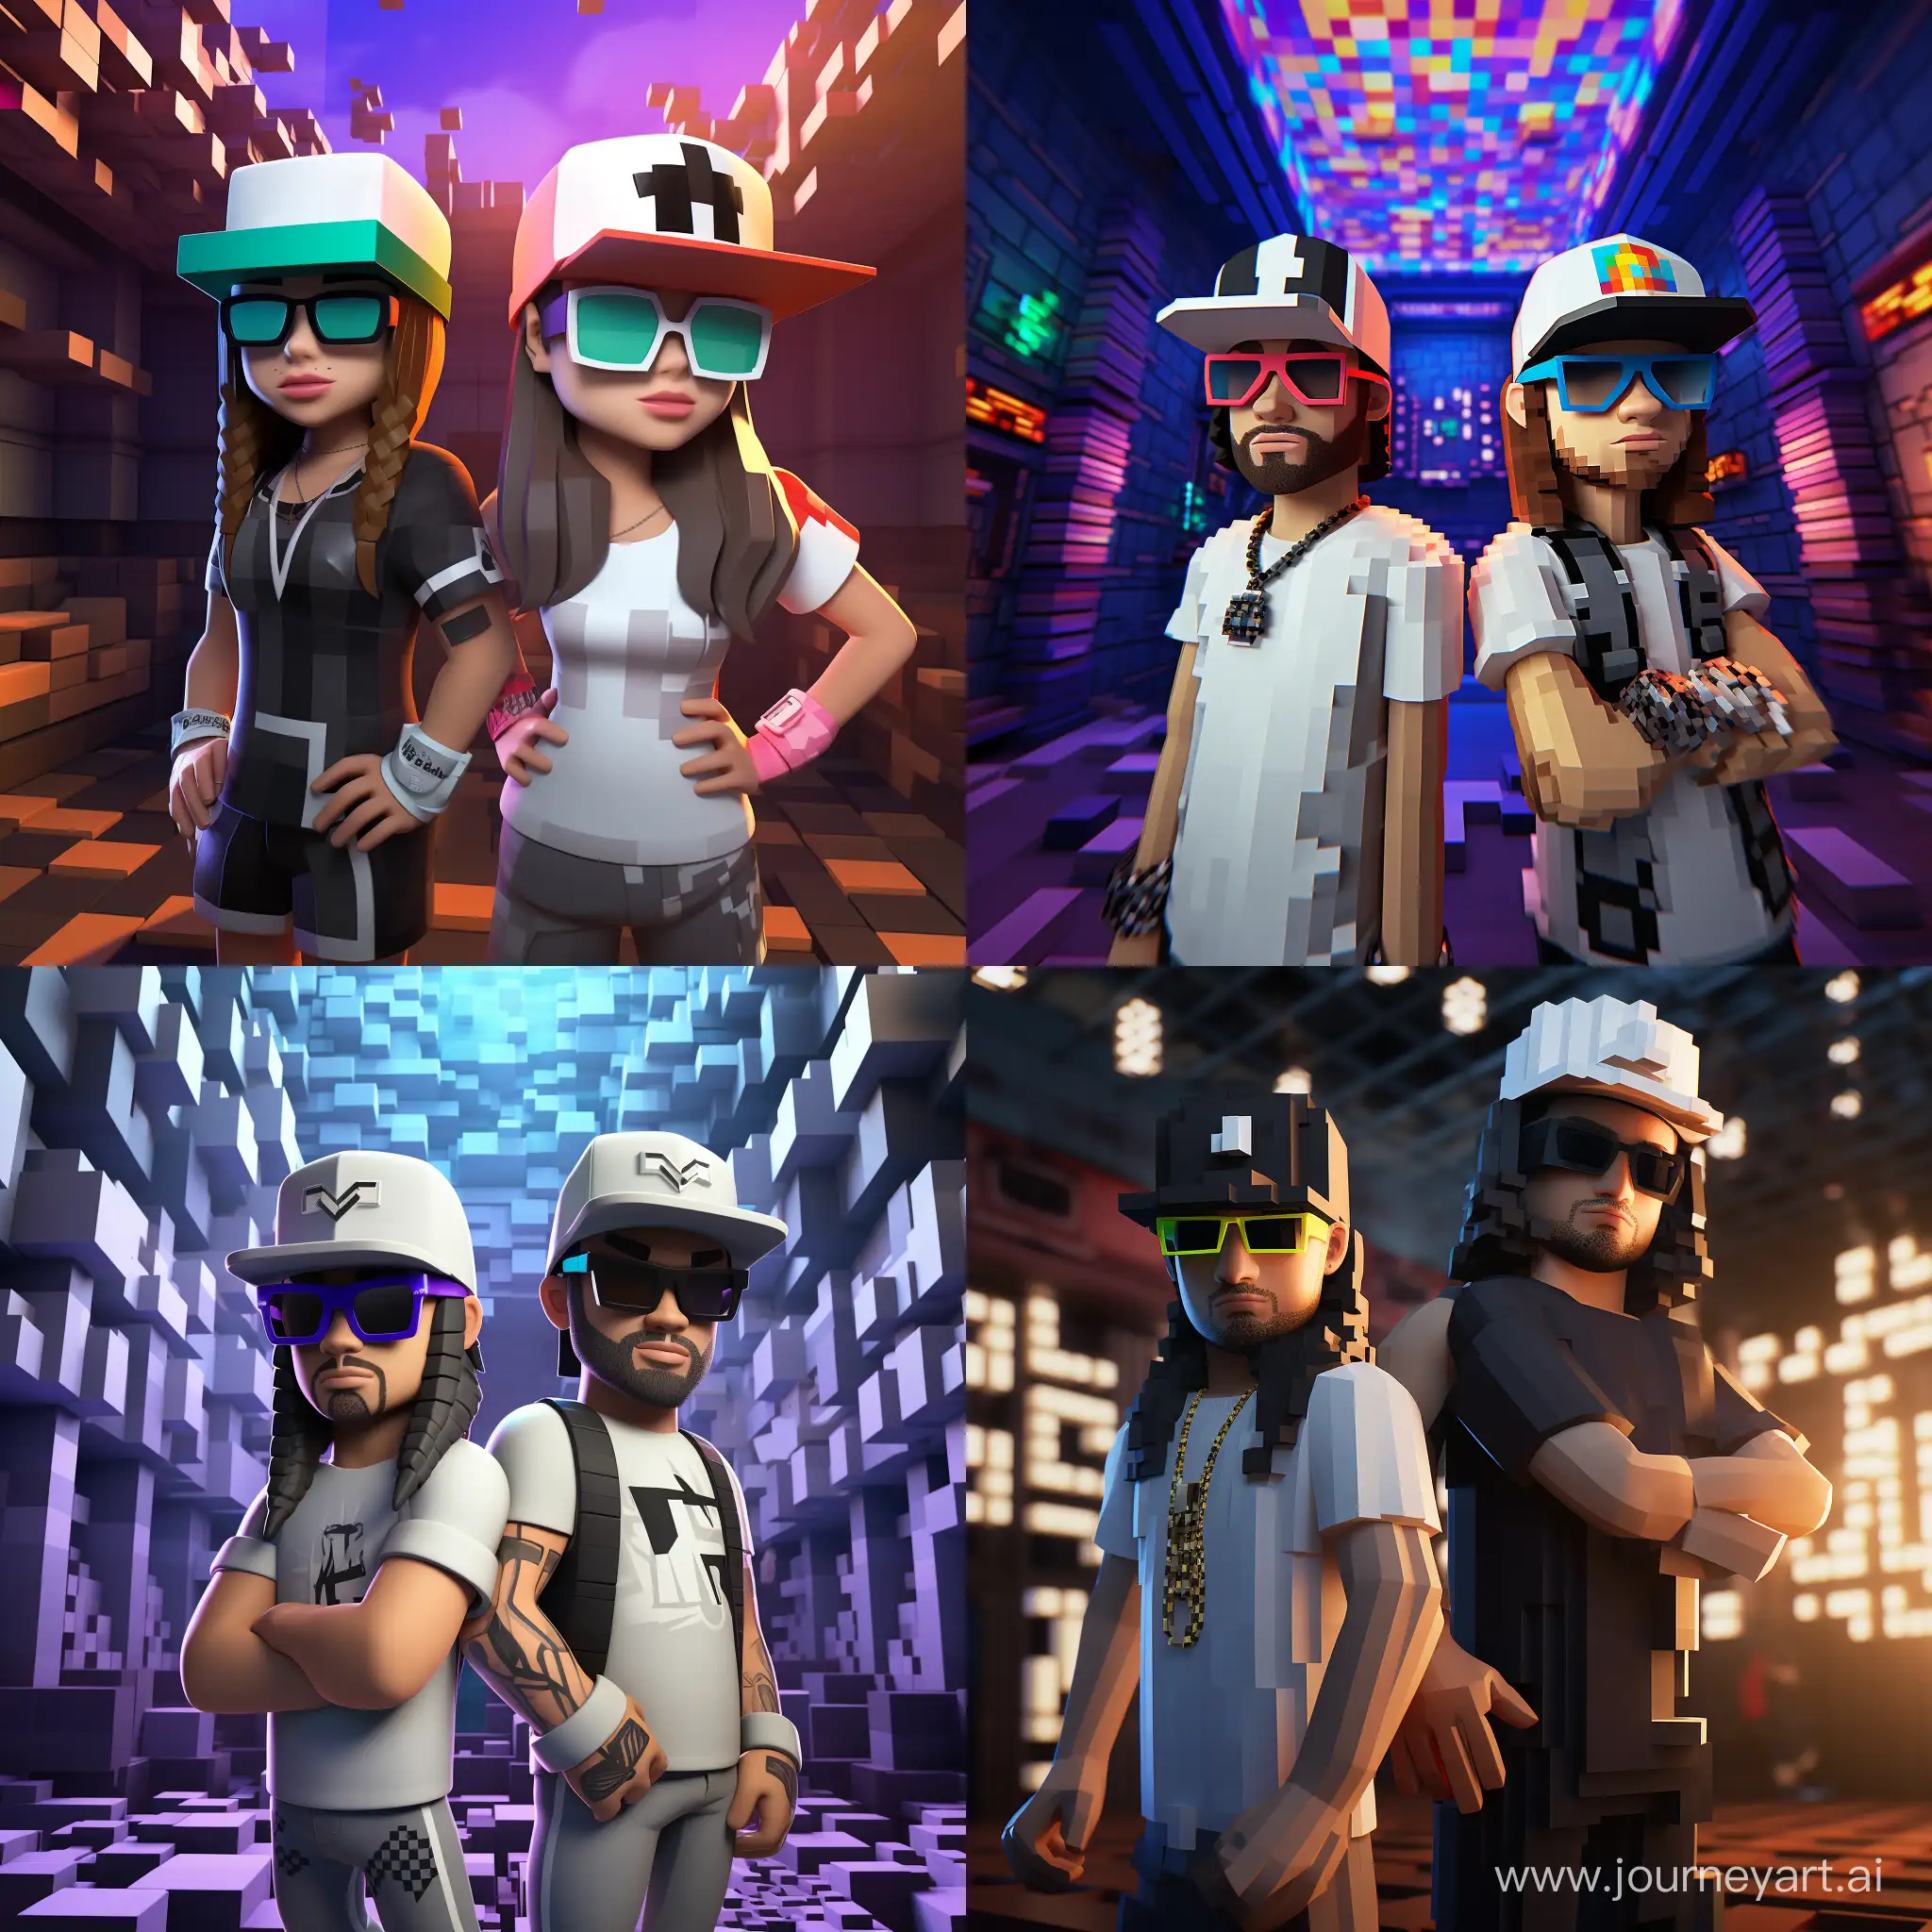 Stylish-Rappers-in-3D-Urban-Scene-with-Cool-Minecraft-Vibe